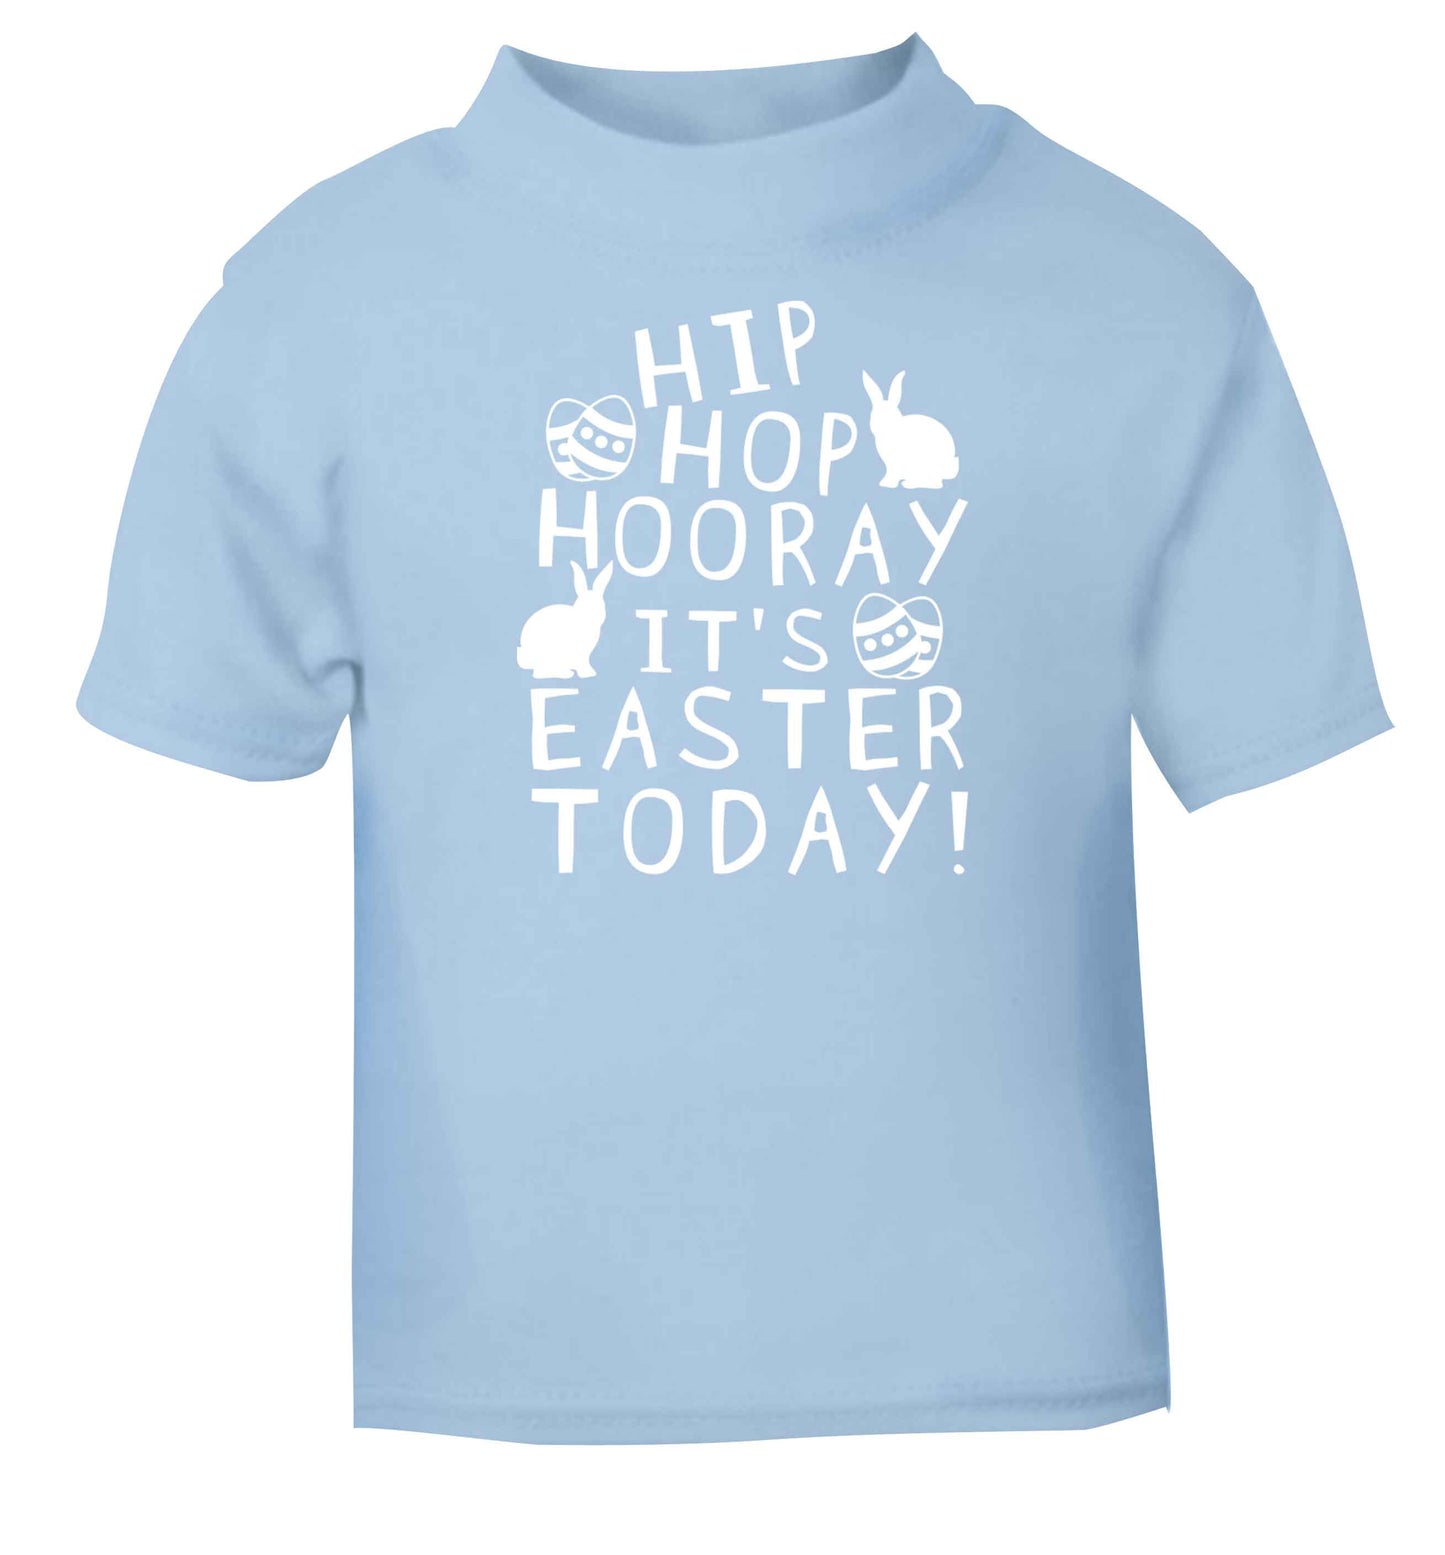 Hip hip hooray it's Easter today! light blue baby toddler Tshirt 2 Years